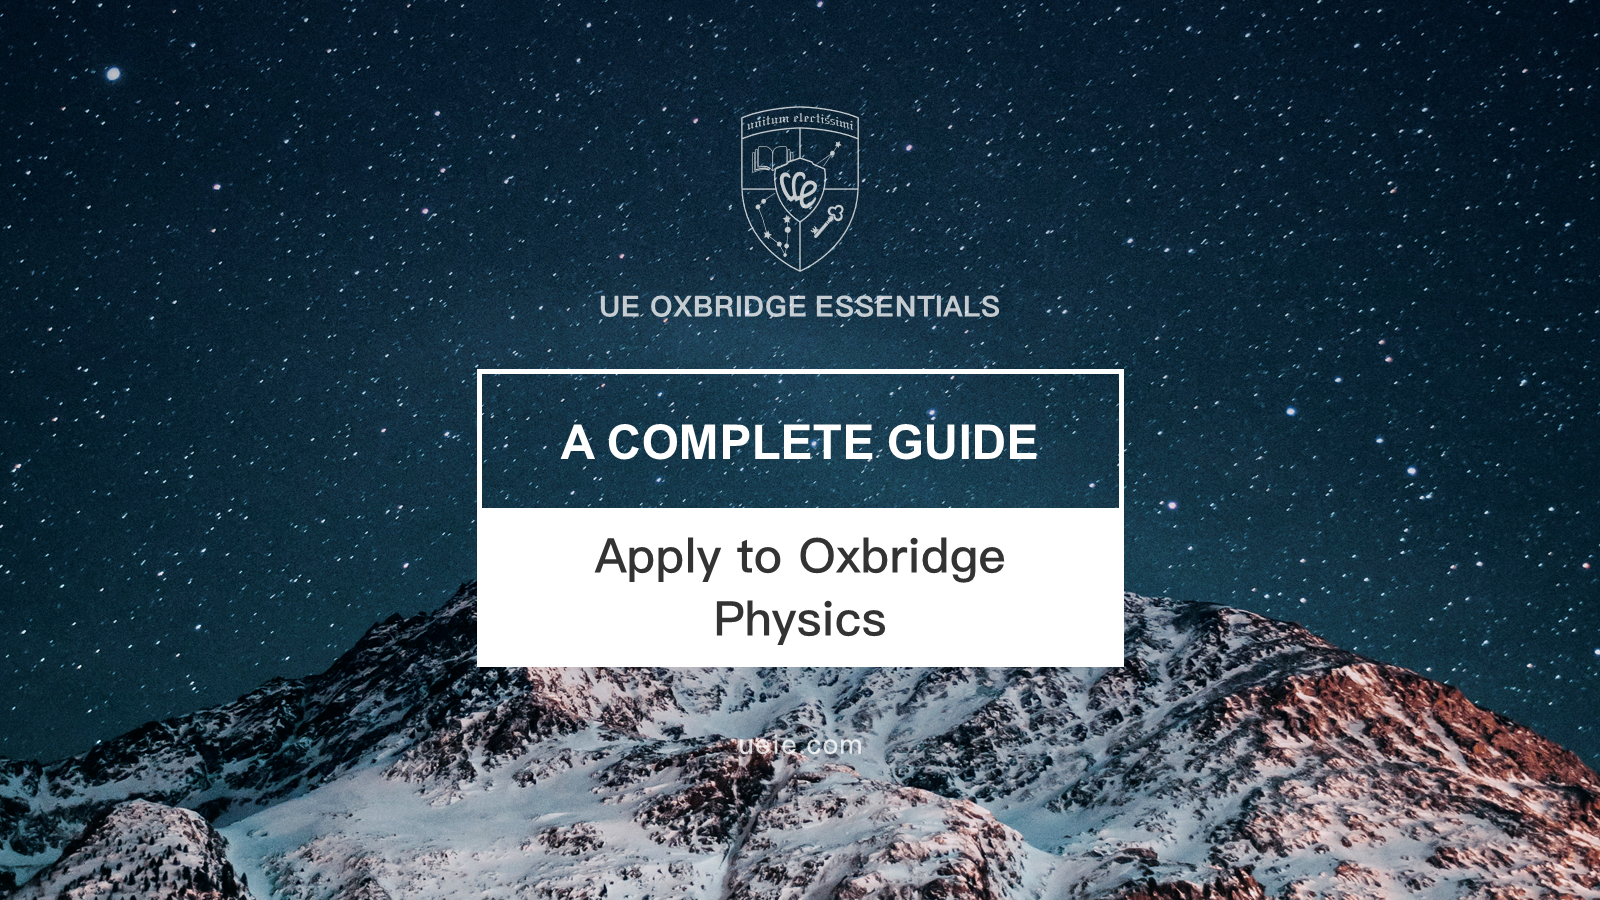 Apply to Oxbridge Physics - A Complete Guide